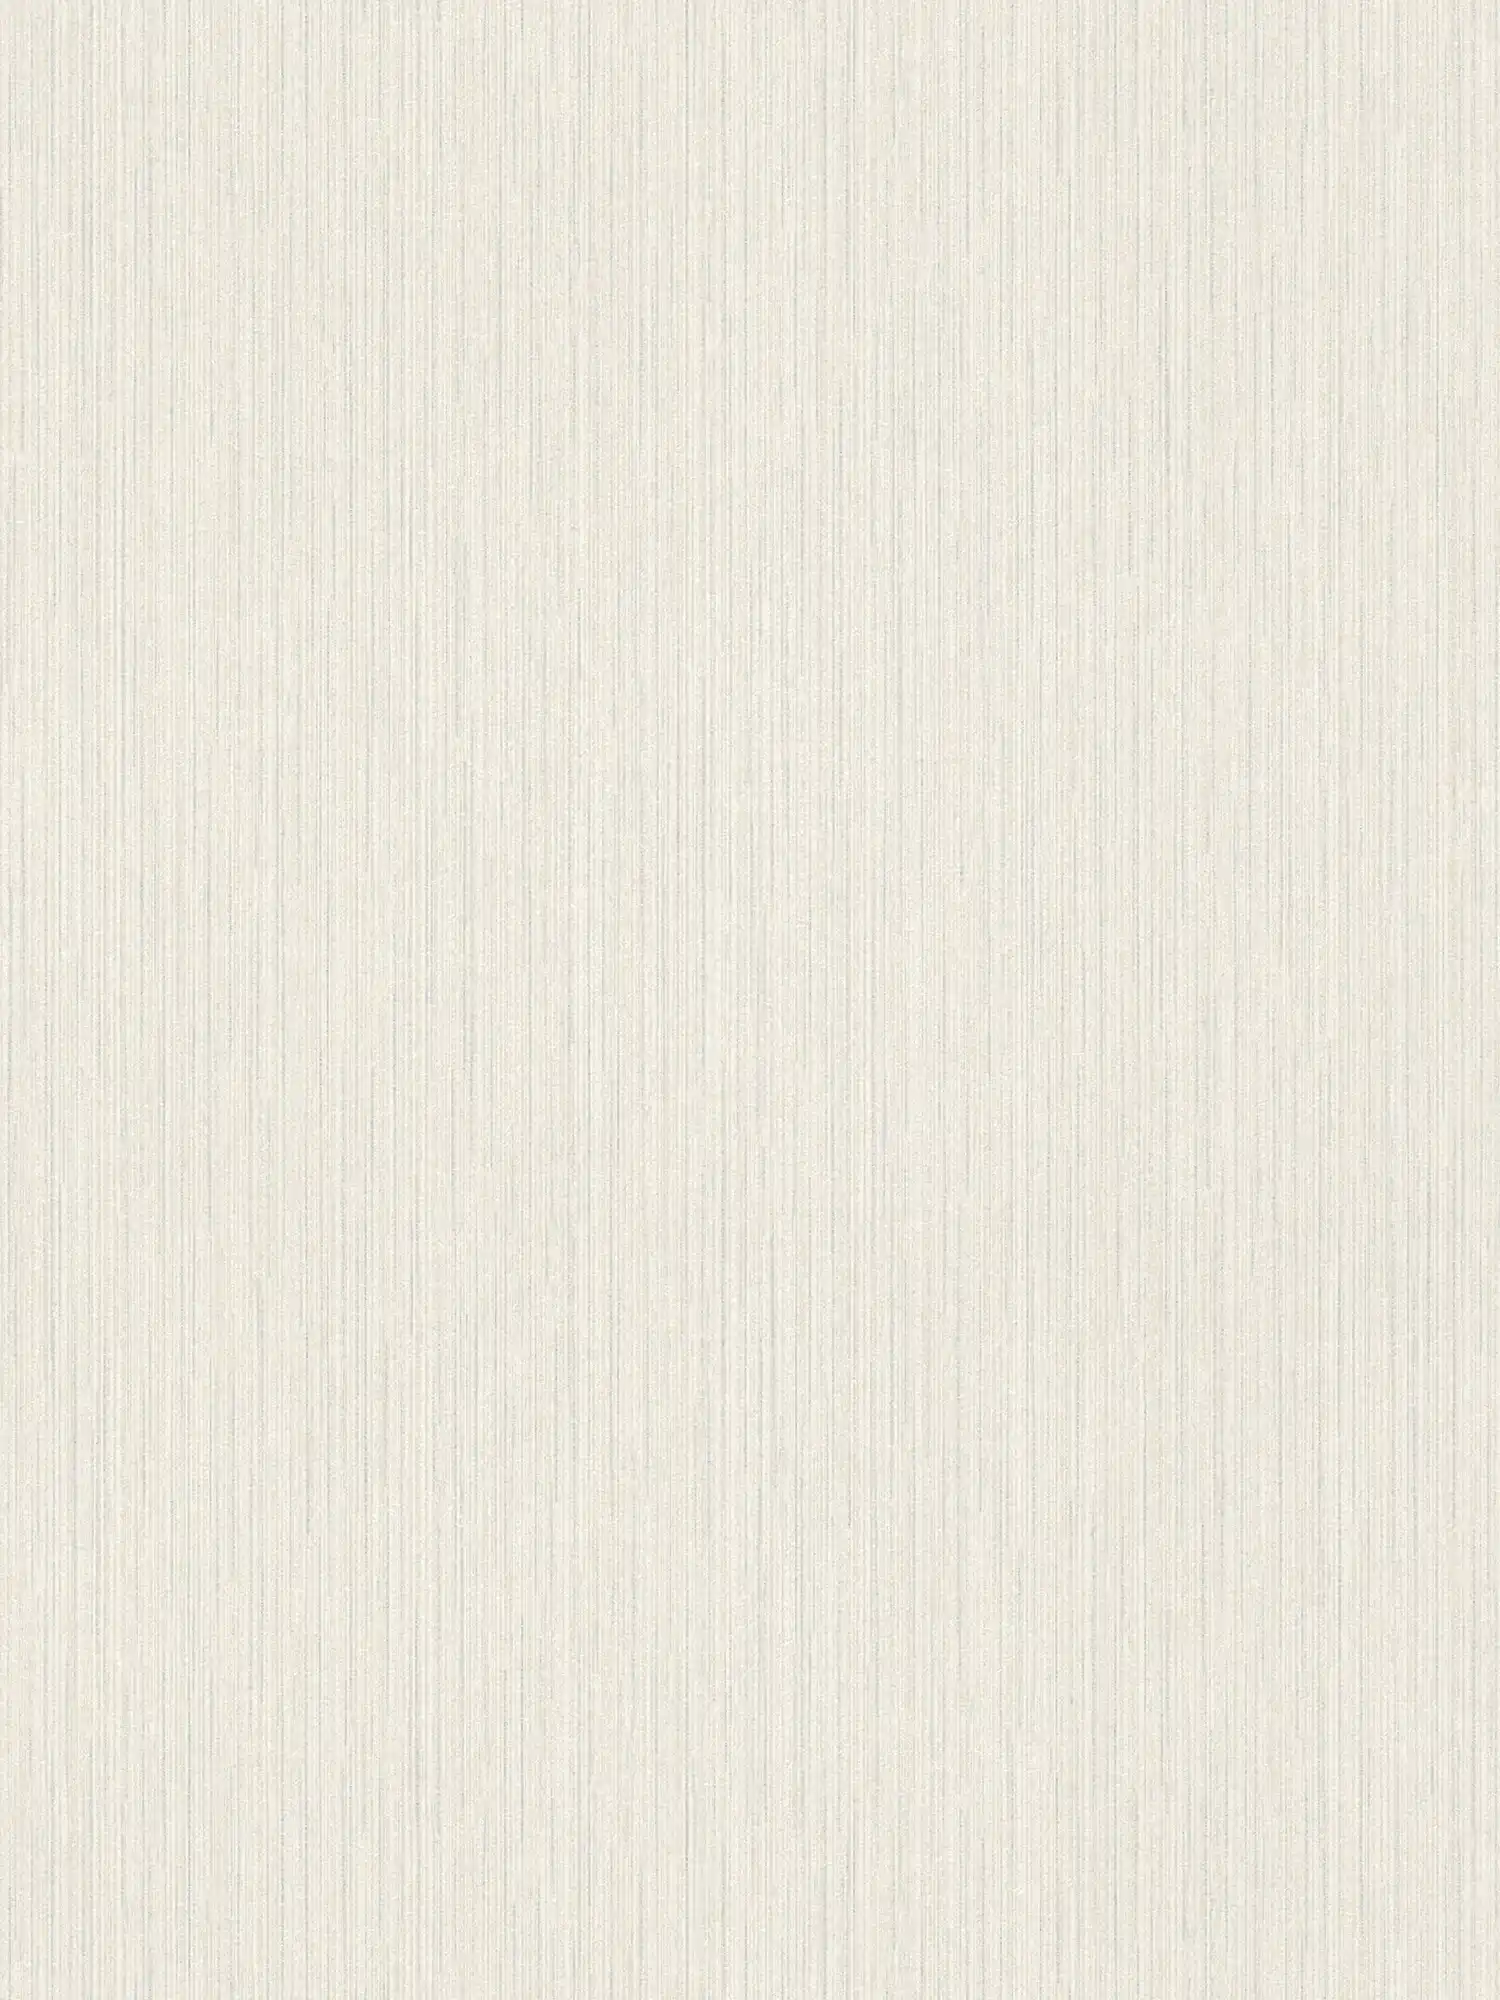 Glitter wallpaper with lined design & wild silk look - white
